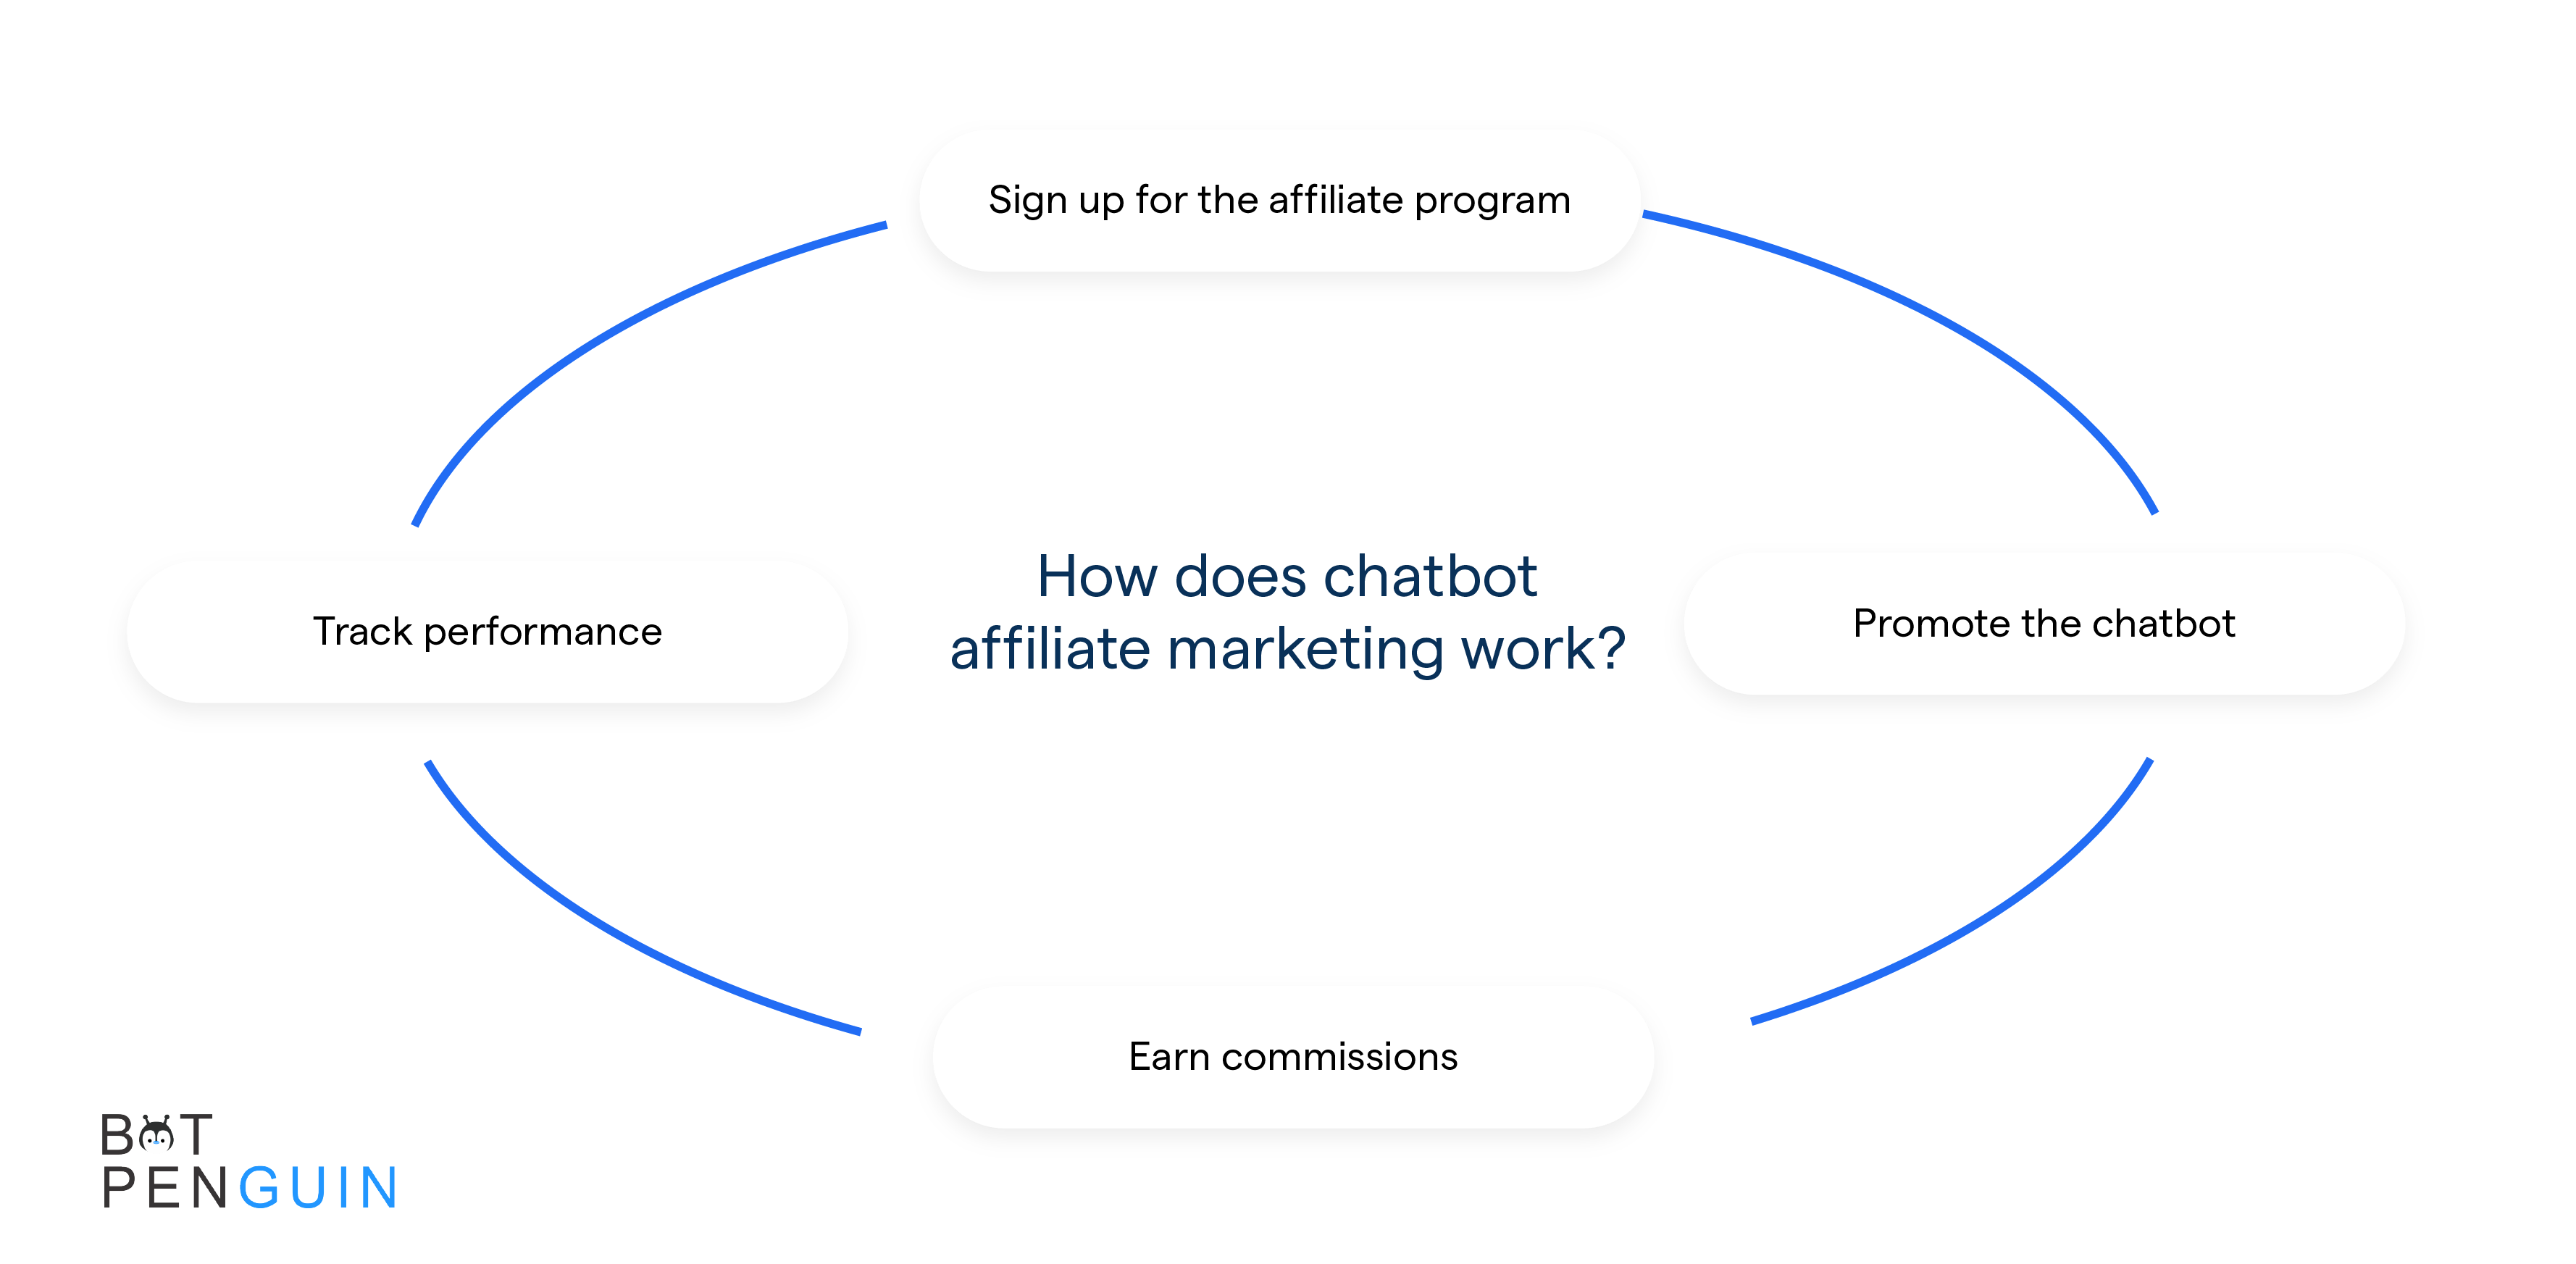 How does chatbot affiliate marketing work